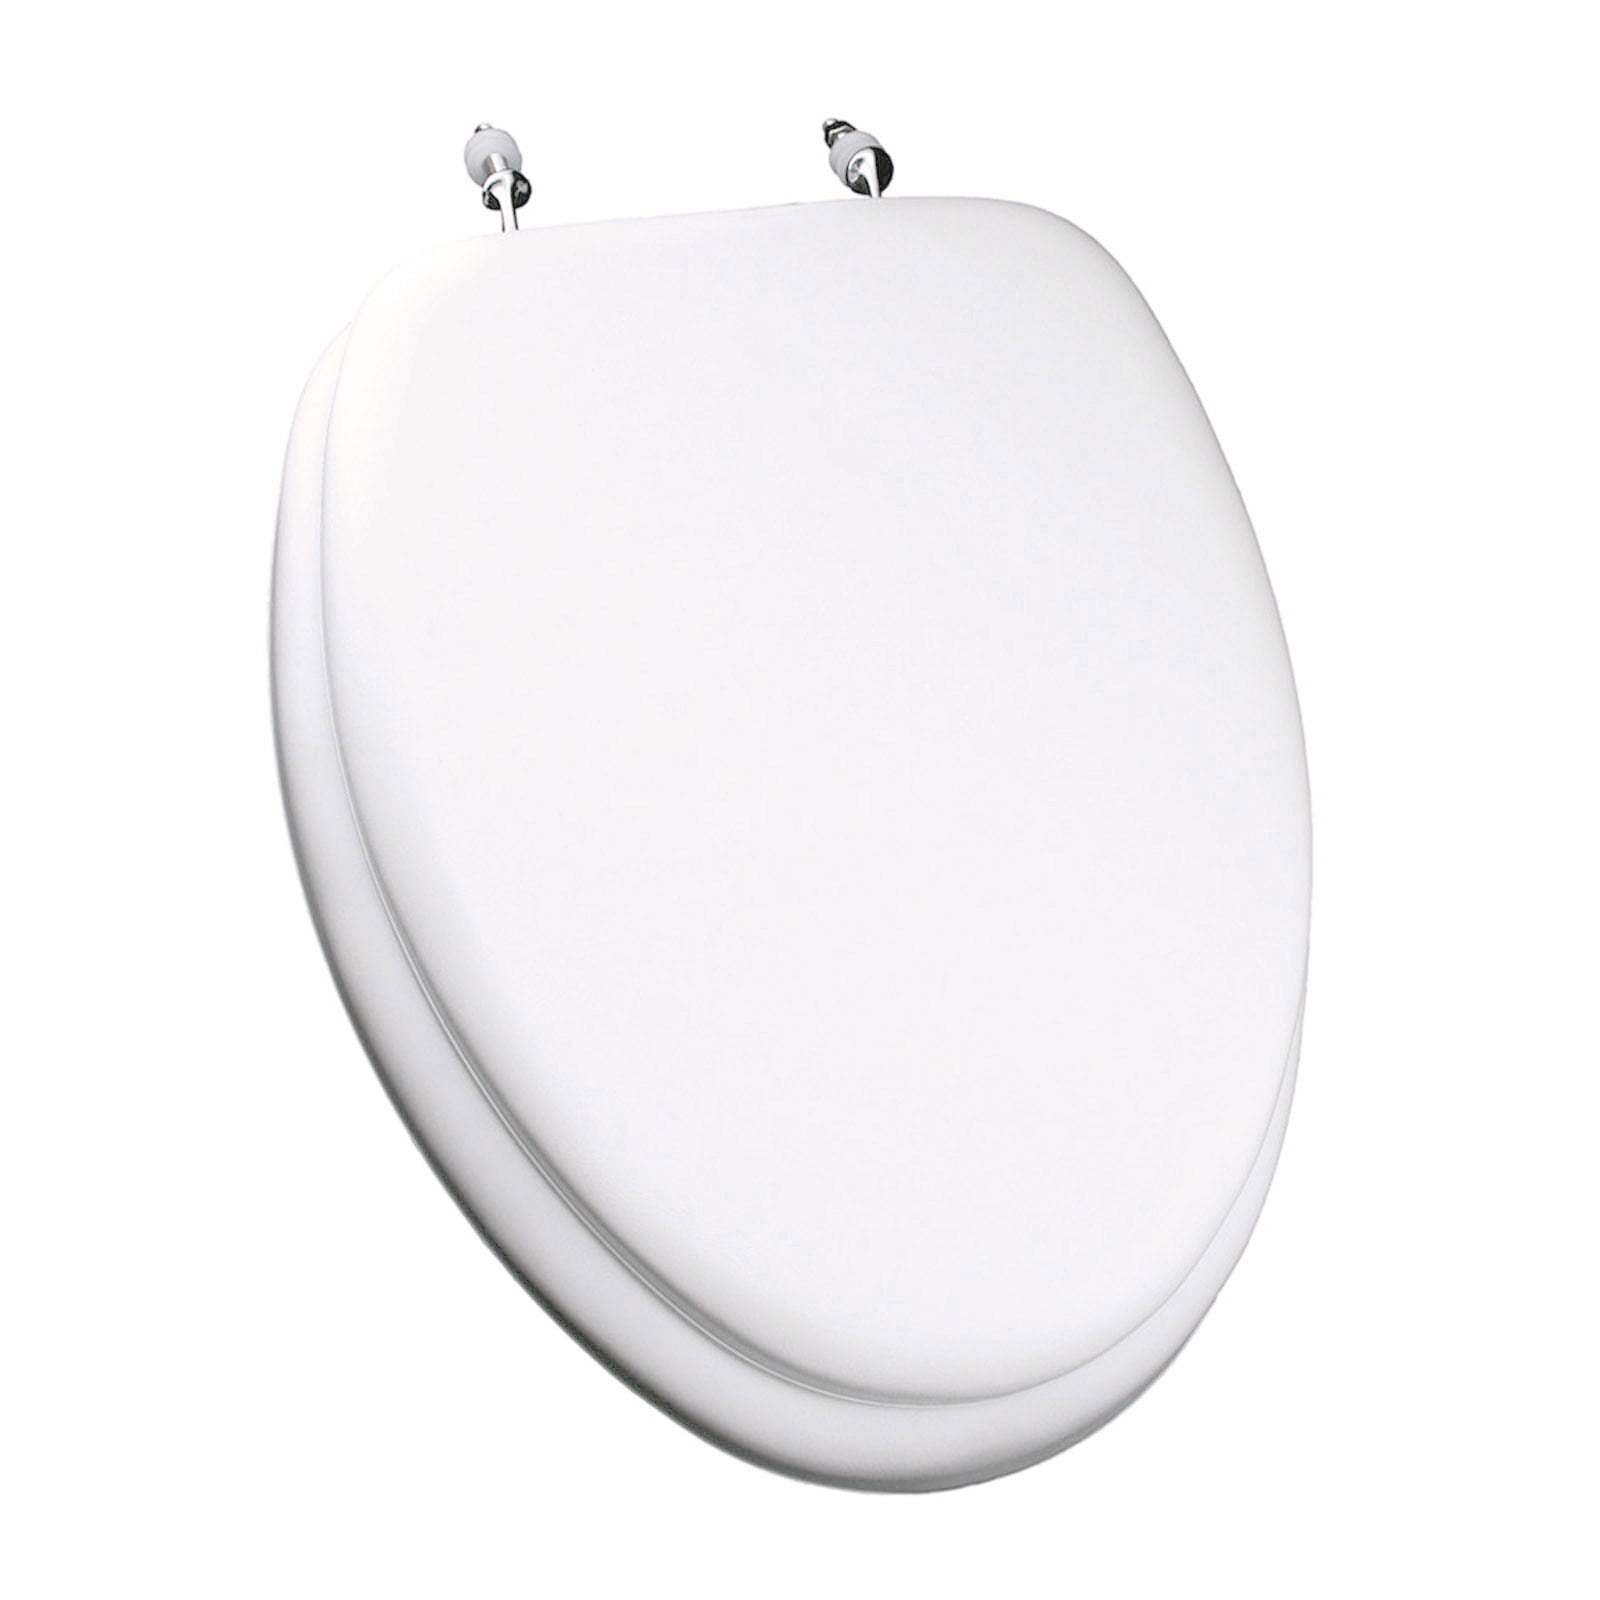 Toilet Seat Elongated White Closed Front Soft Cushioned Seat Bathroom Decor 